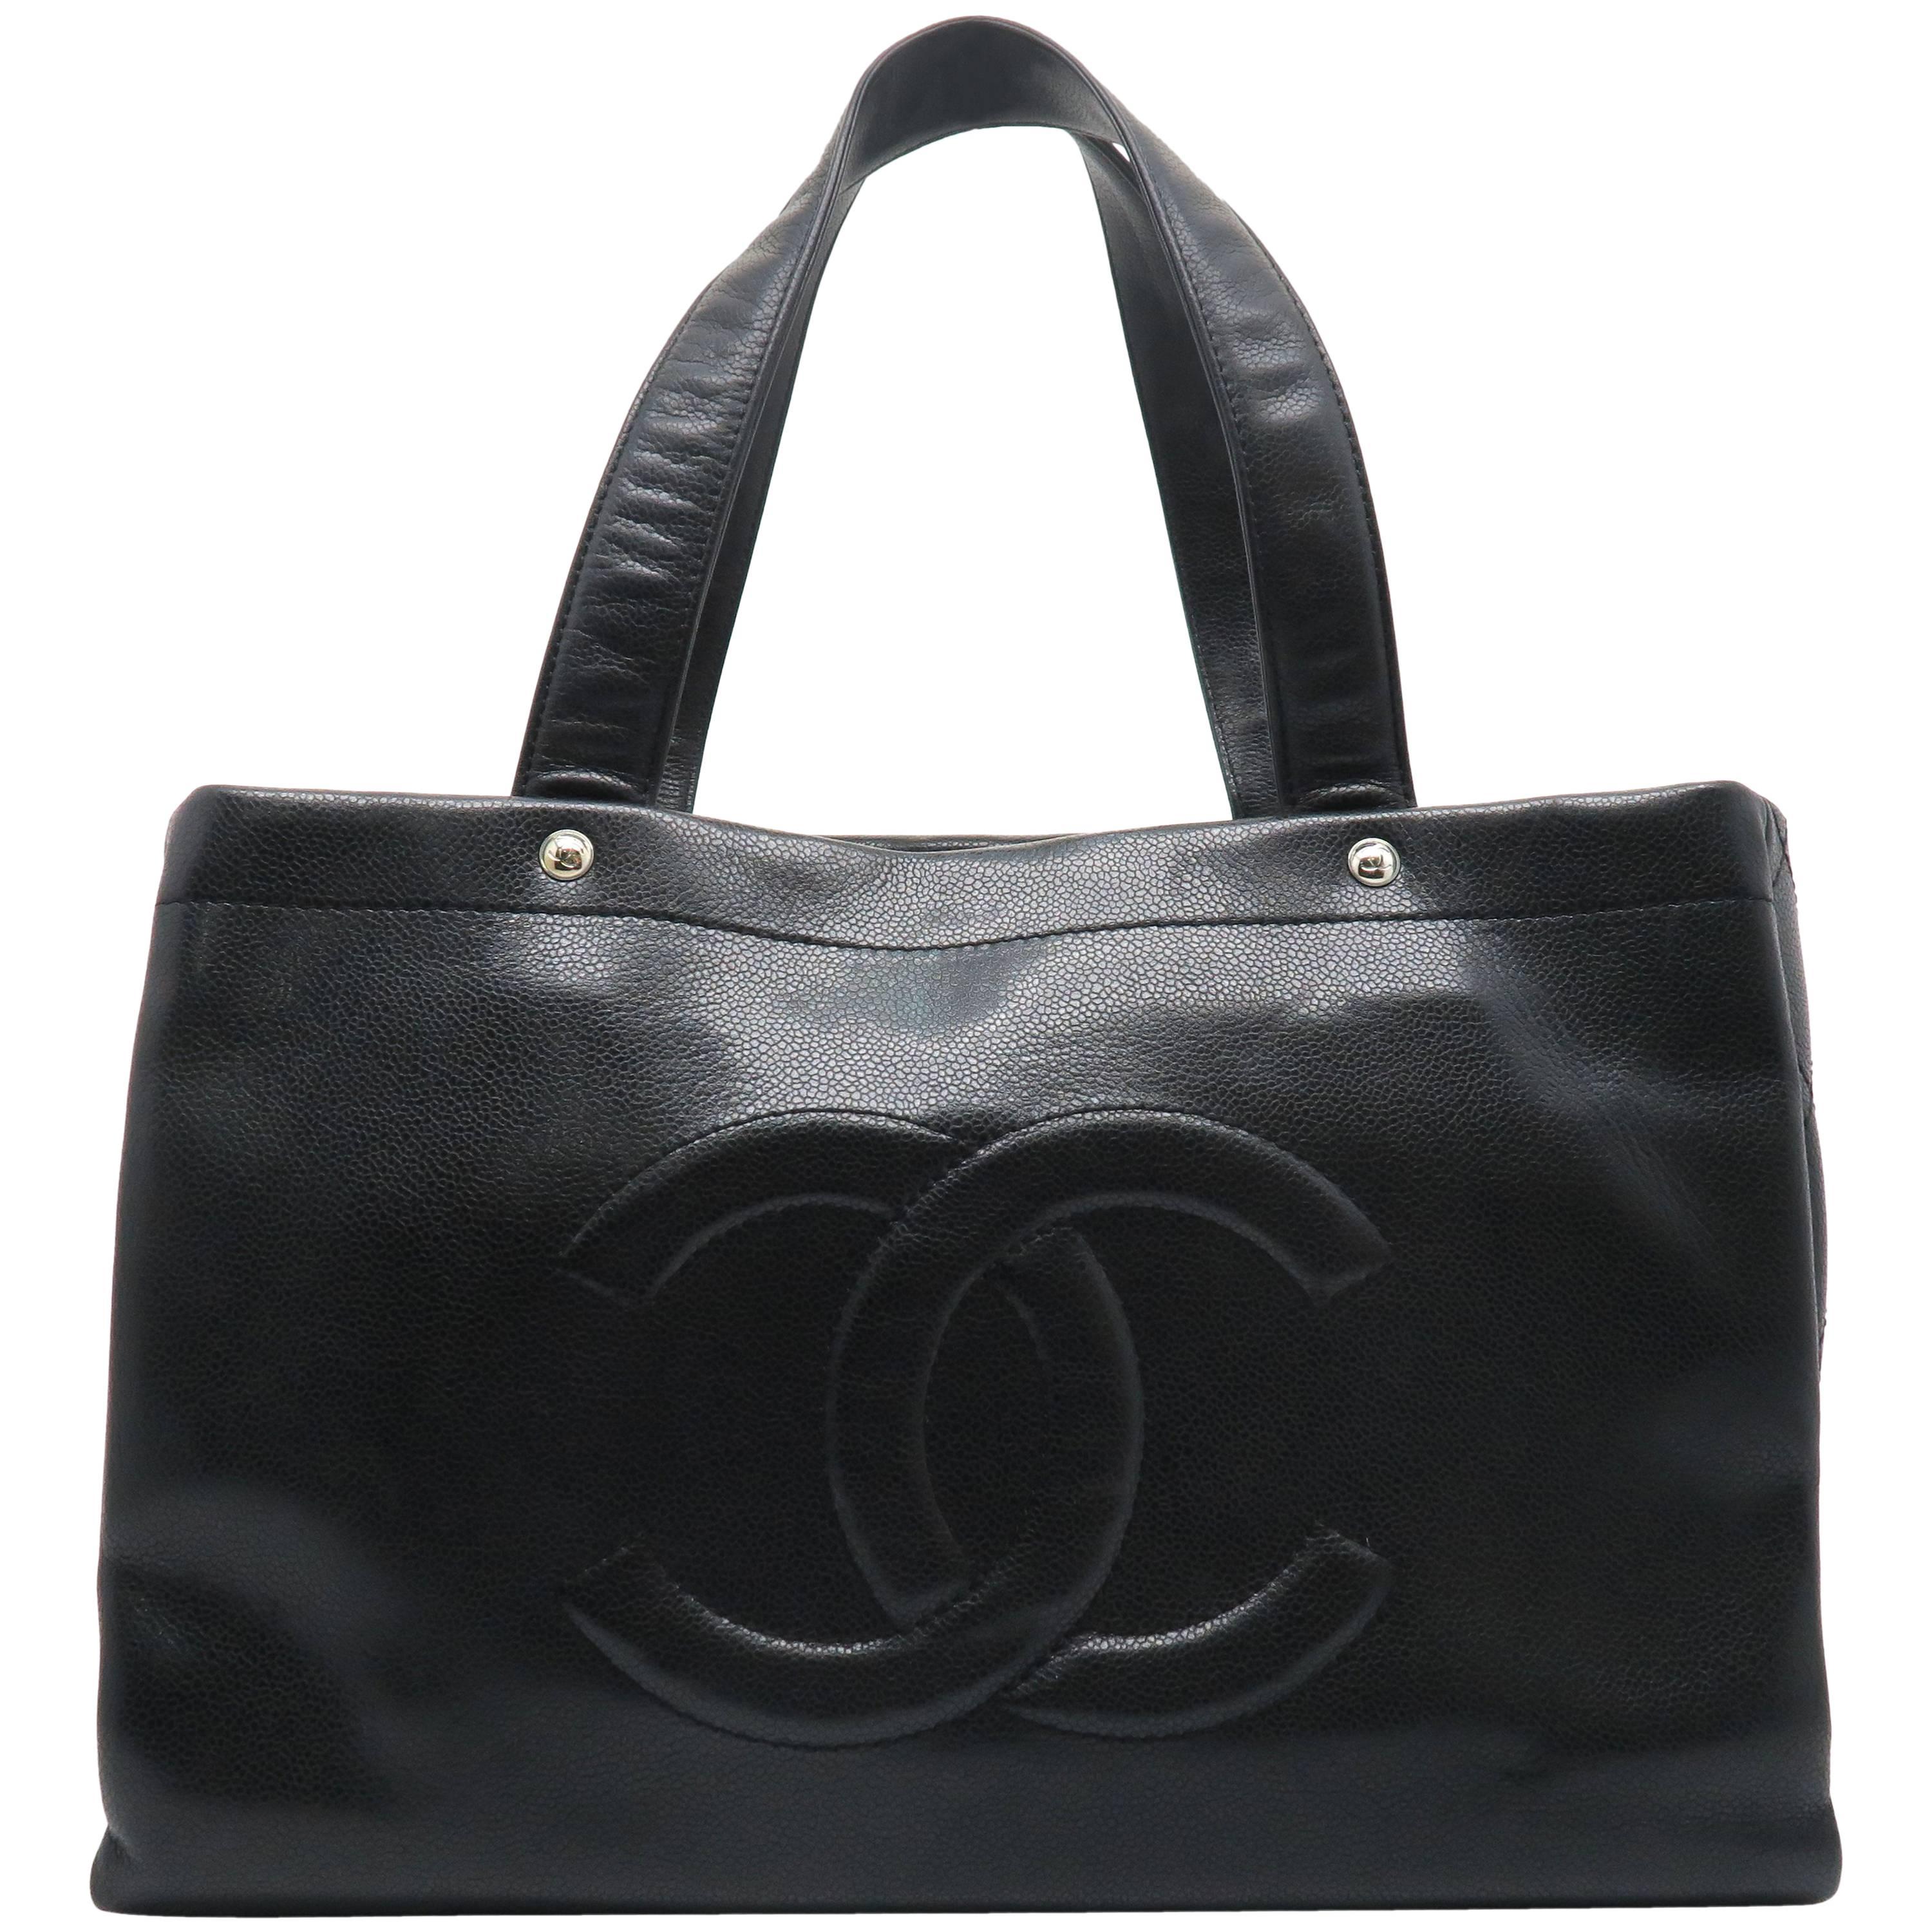 Chanel Black Caviar Leather Tote Bag For Sale